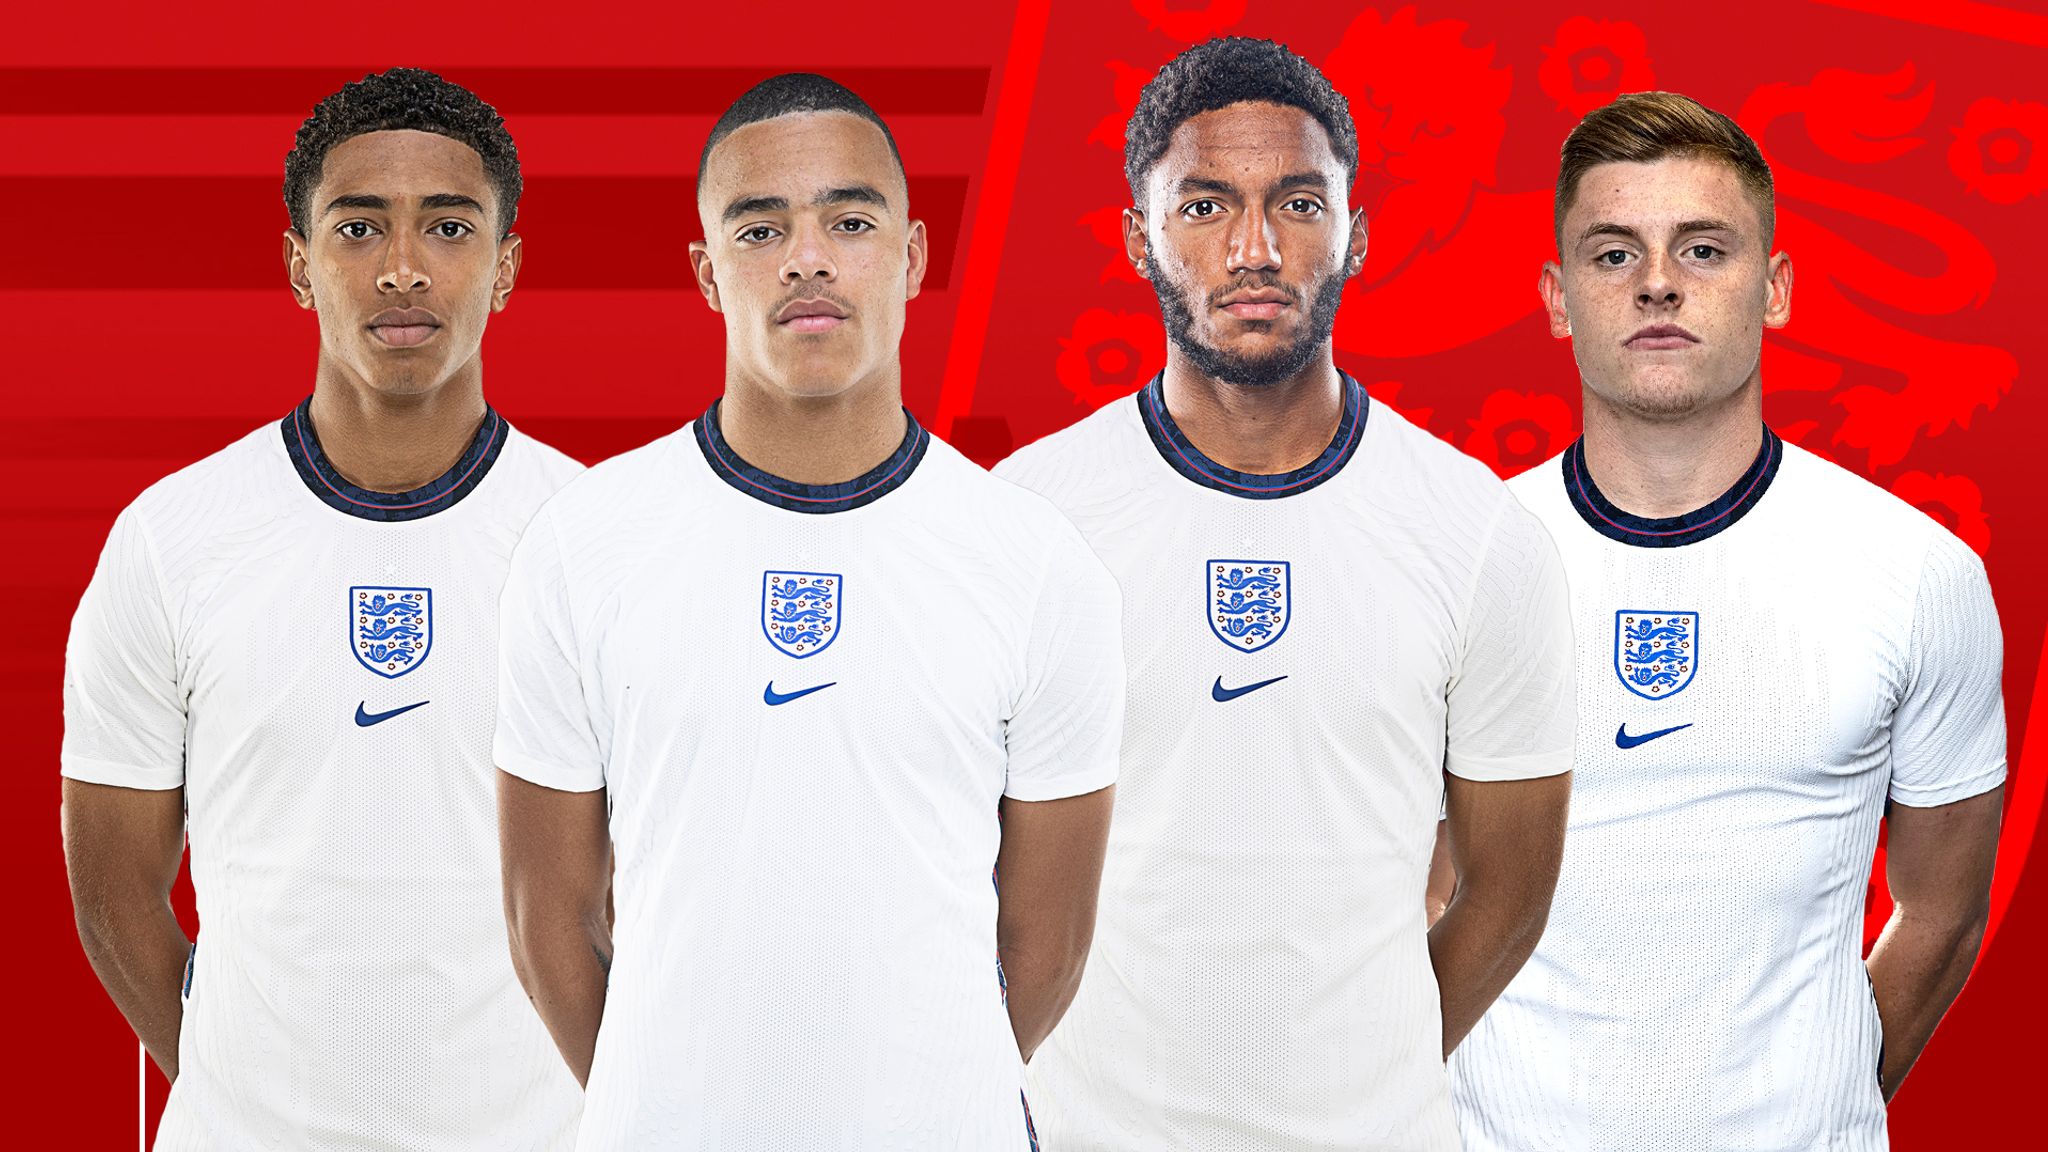 England's stars of the 2022 World Cup in Qatar: Seven players who could get Three Lions over the line